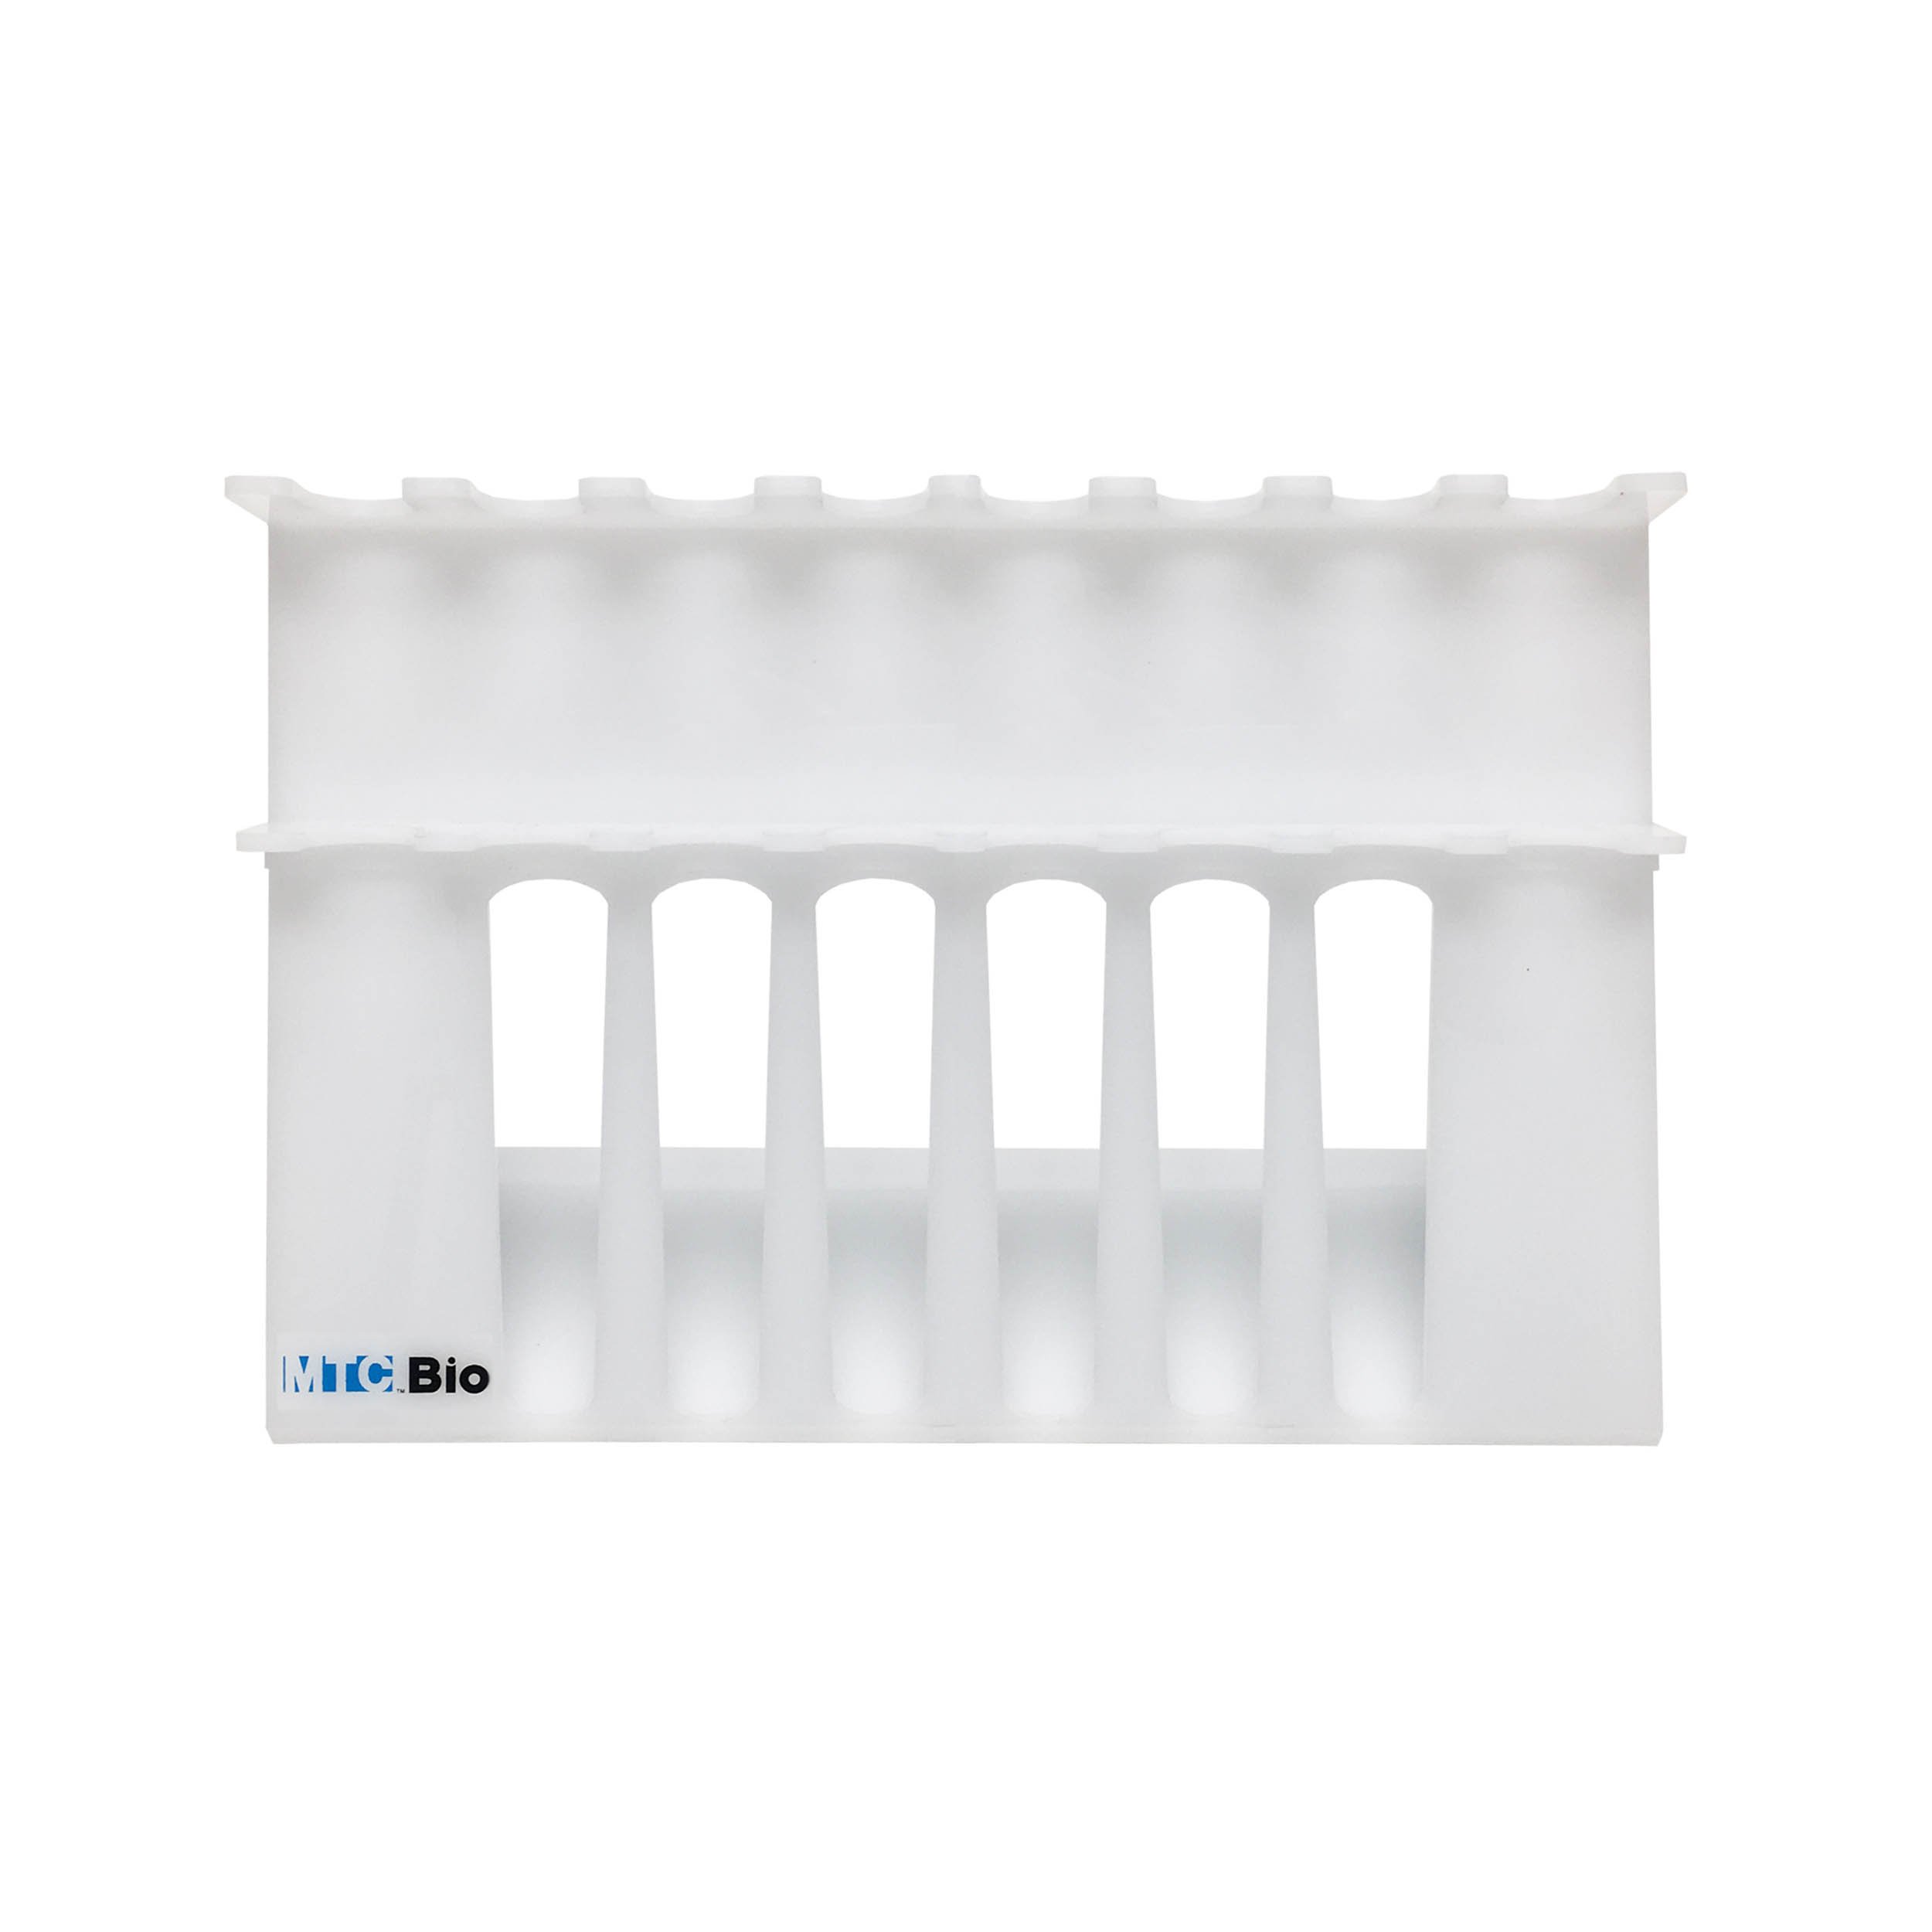 SureStand MultiChannel Capable Acrylic XL Pipette Rack for 8 Pipettes (Up to 6 Multi-Channels) - Pack of 1